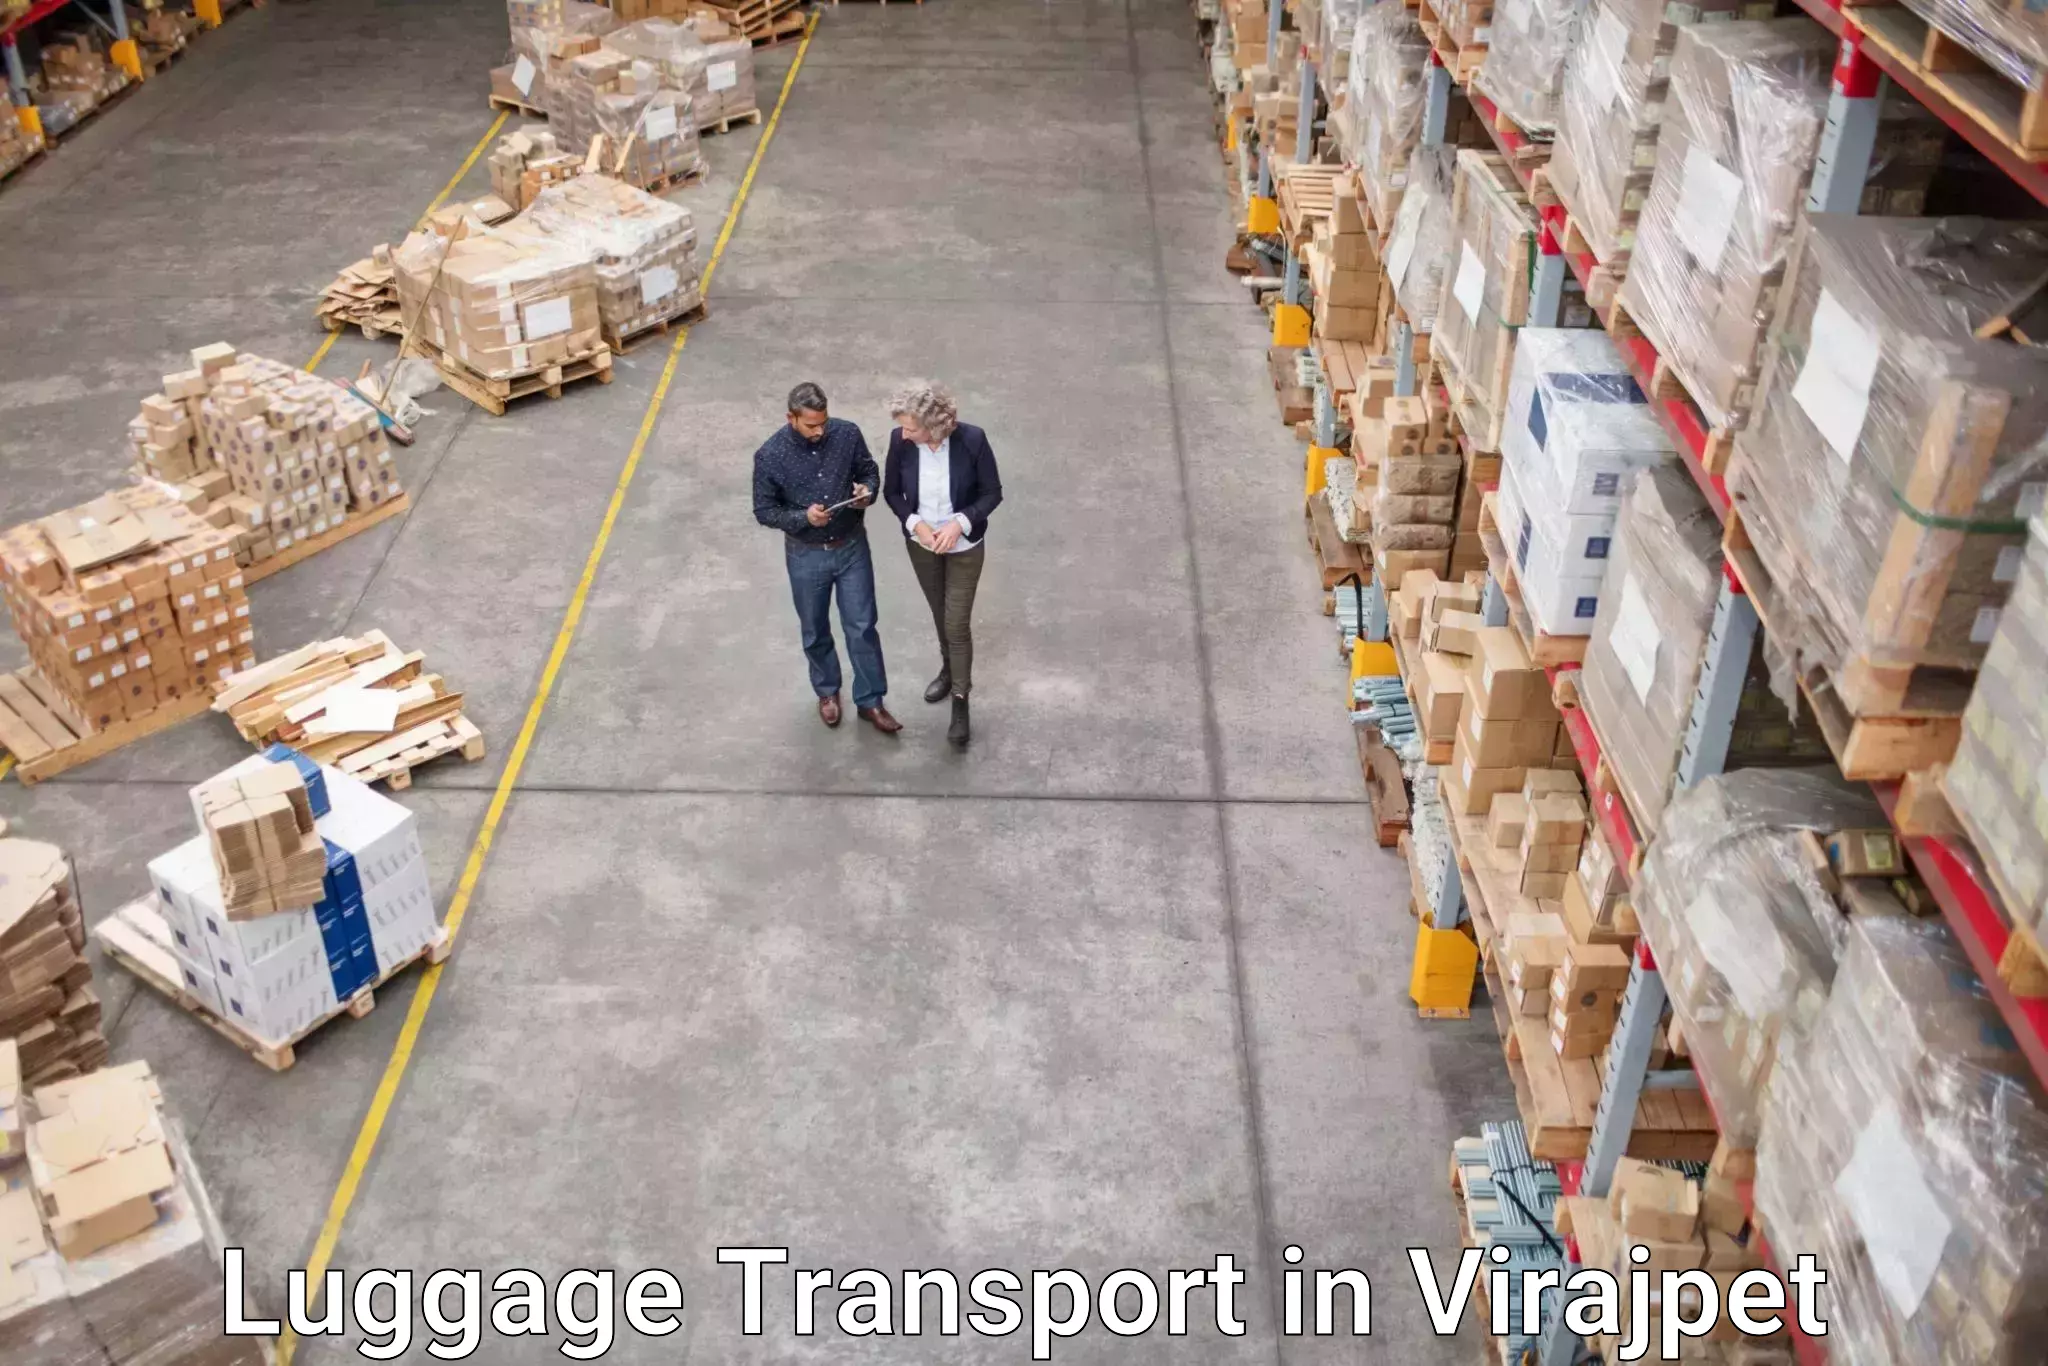 Luggage transport operations in Virajpet